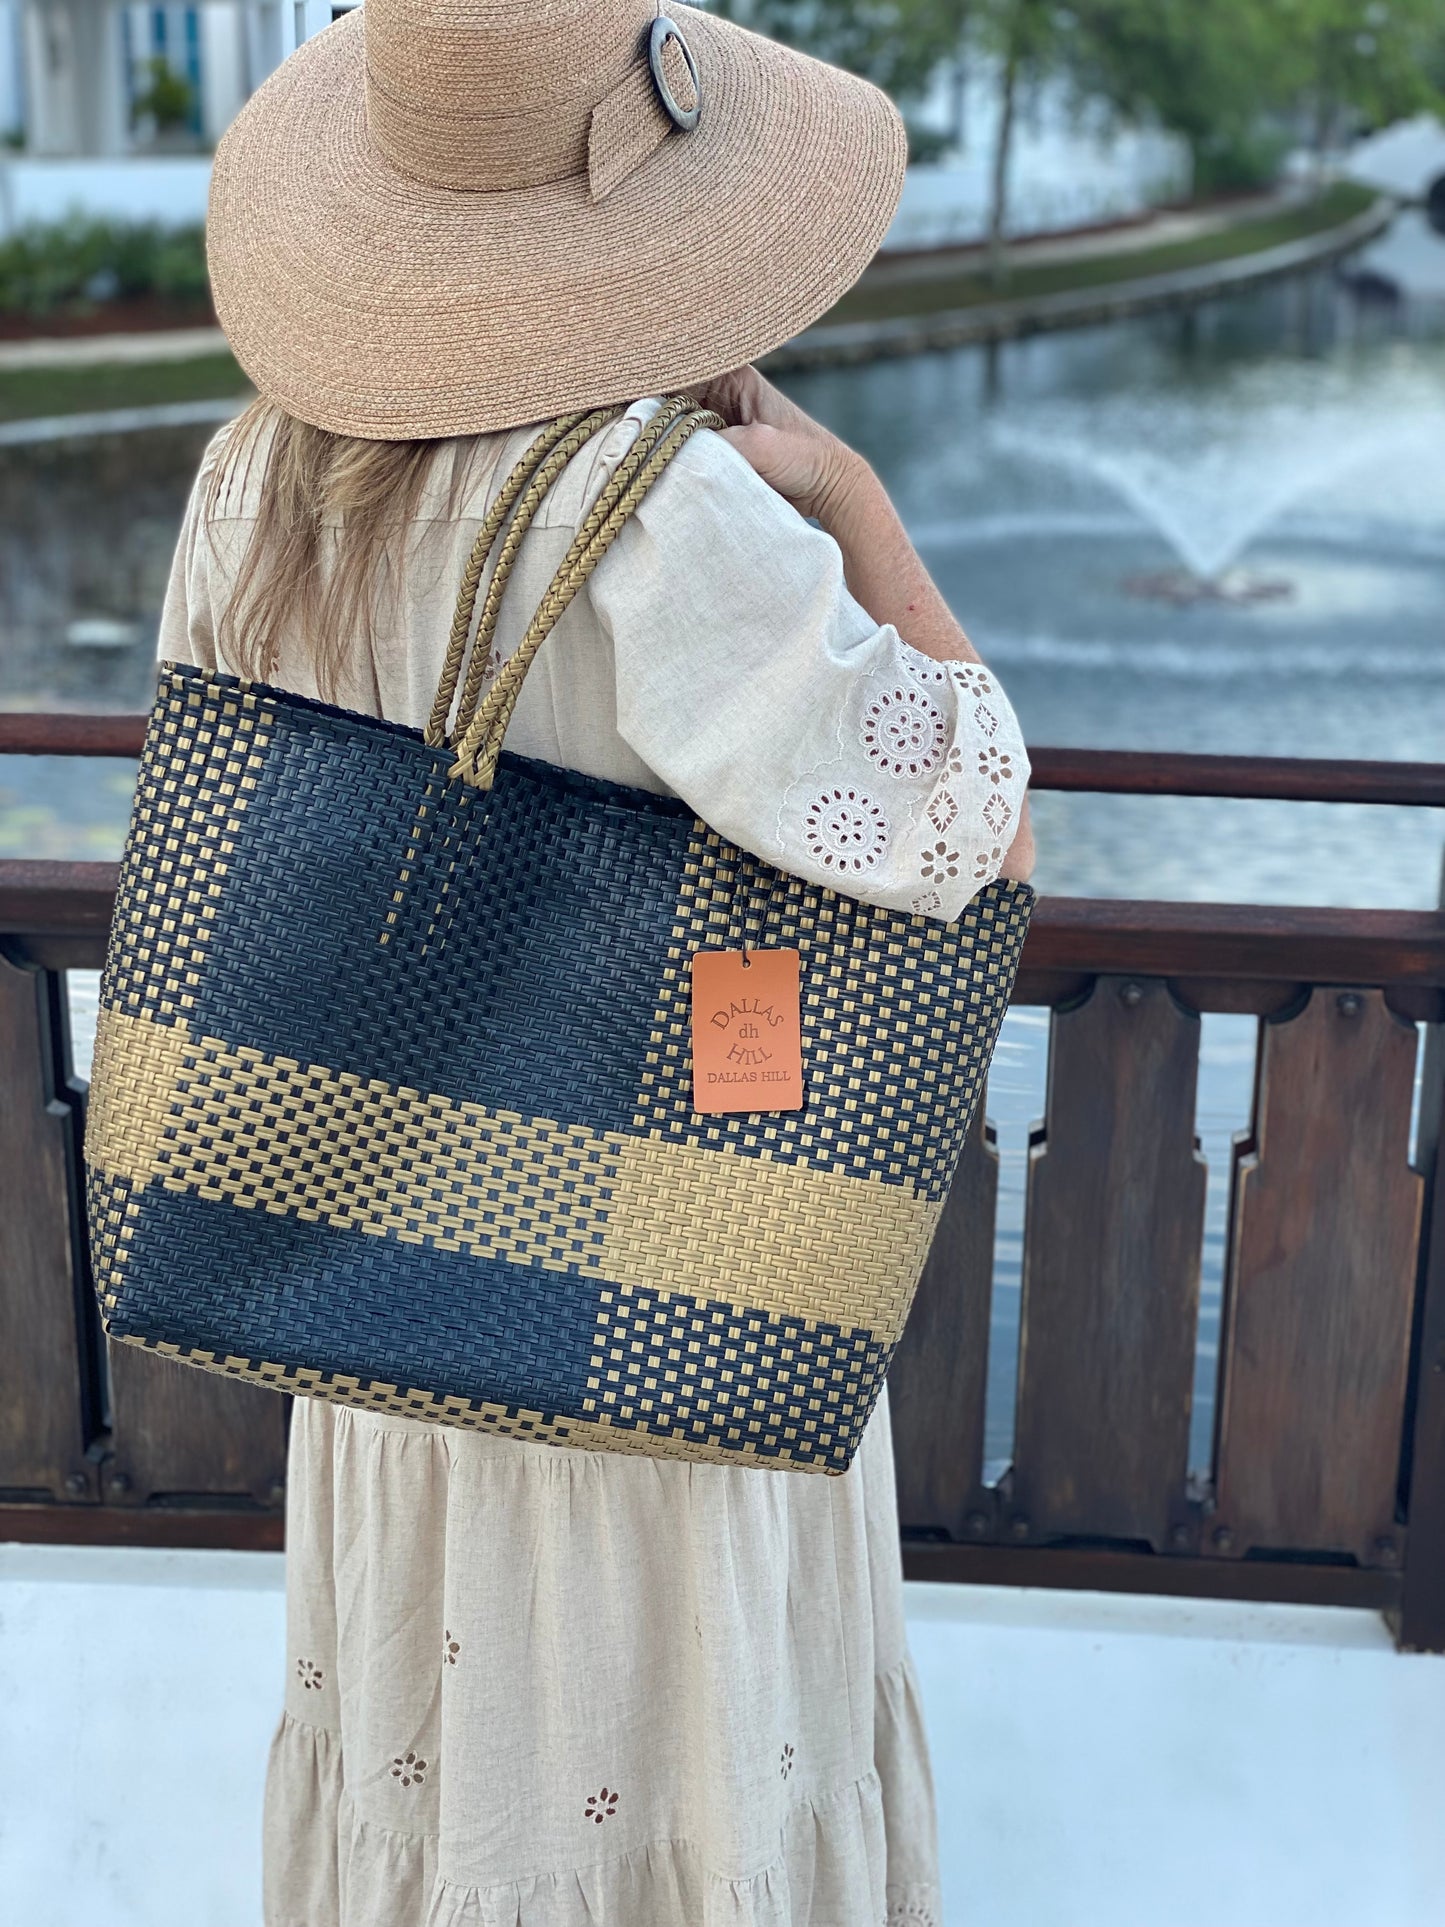 Woven Super Tote, Handwoven Recycled Plastic Tote, Woven Bag, Beach Bag, Summer Bag